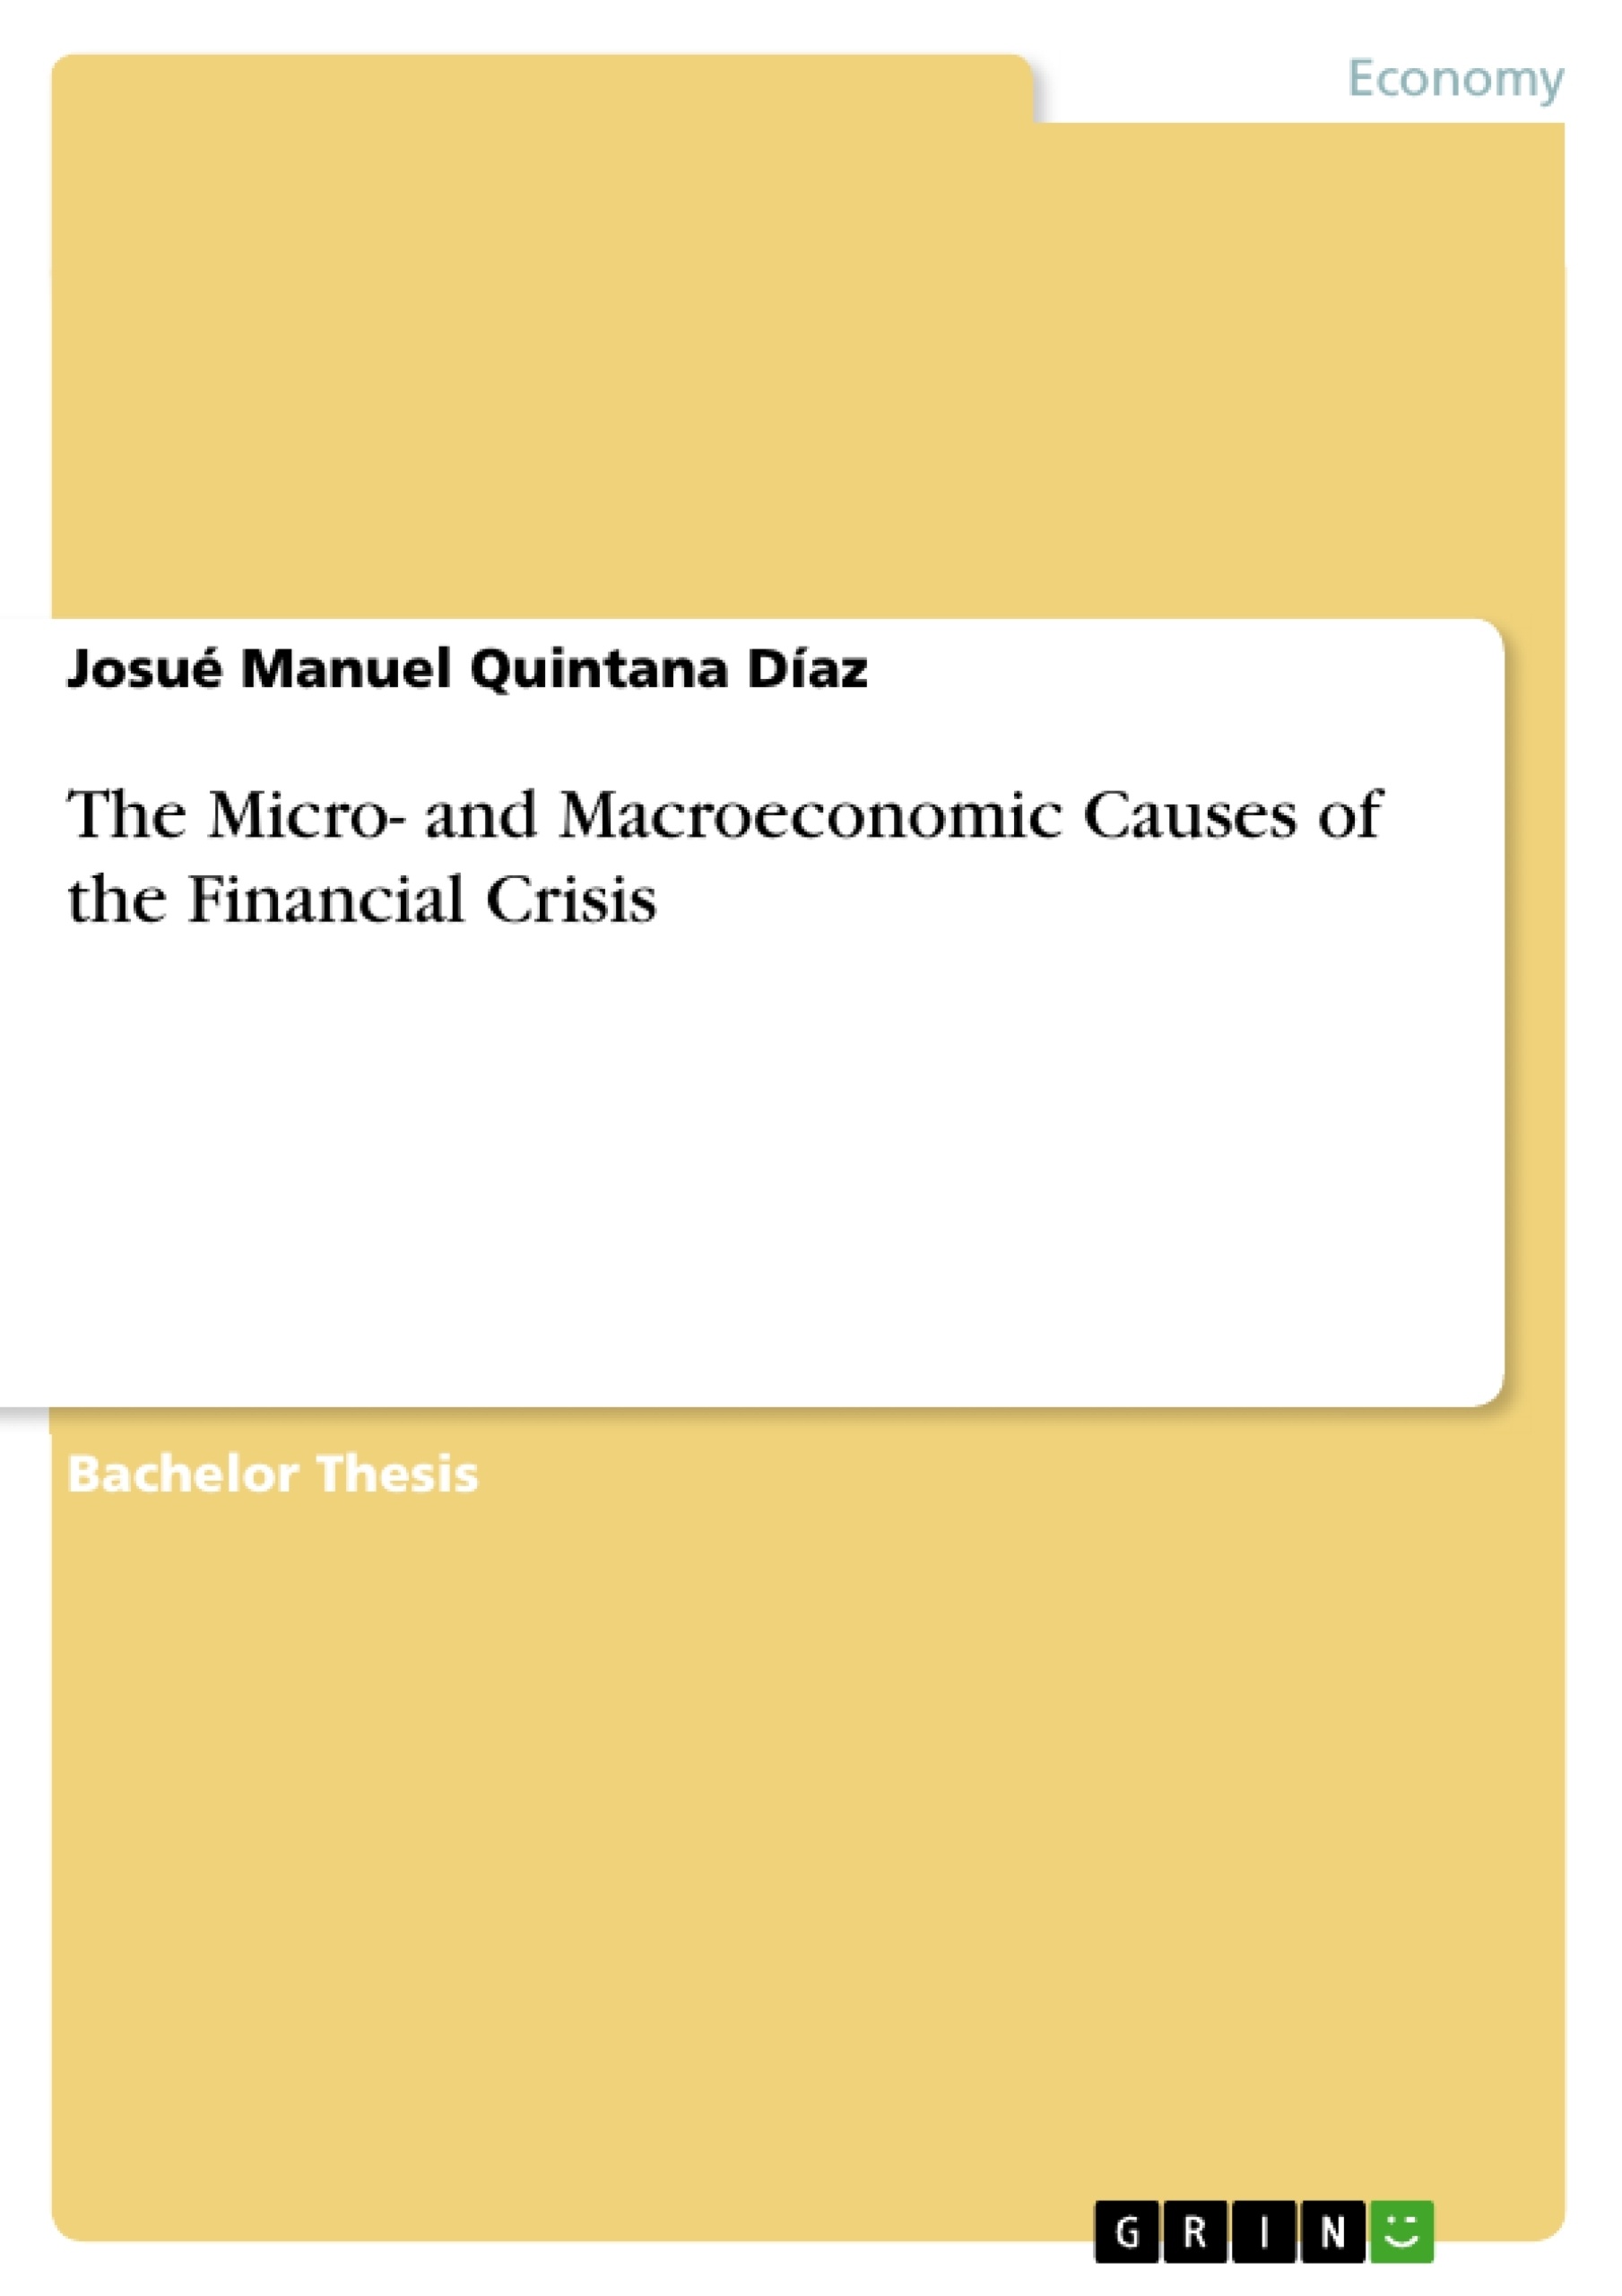 Title: The Micro- and Macroeconomic Causes of the Financial Crisis